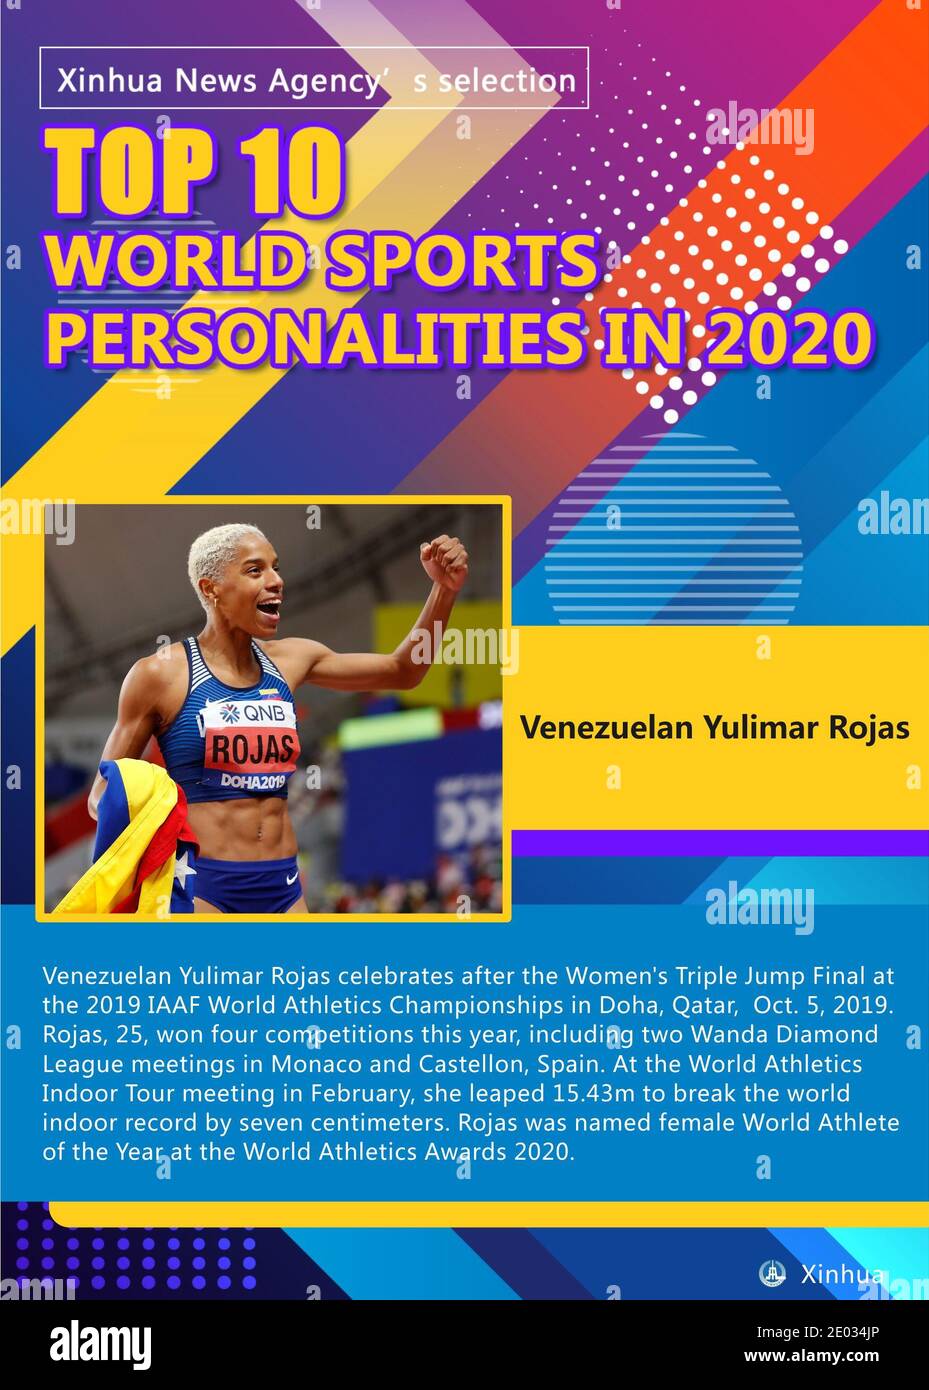 Beijing, Qatar. 5th Oct, 2019. Venezuelan Yulimar Rojas celebrates after the Women's Triple Jump Final at the 2019 IAAF World Athletics Championships in Doha, Qatar, Oct. 5, 2019. Rojas, 25, won four competitions this year, including two Wanda Diamond League meetings in Monaco and Castellon, Spain. At the World Athletics Indoor Tour meeting in February, she leaped 15.43m to break the world indoor record by seven centimeters. Rojas was named female World Athlete of the Year at the World Athletics Awards 2020. Credit: Shi Manke/Xinhua/Alamy Live News Stock Photo